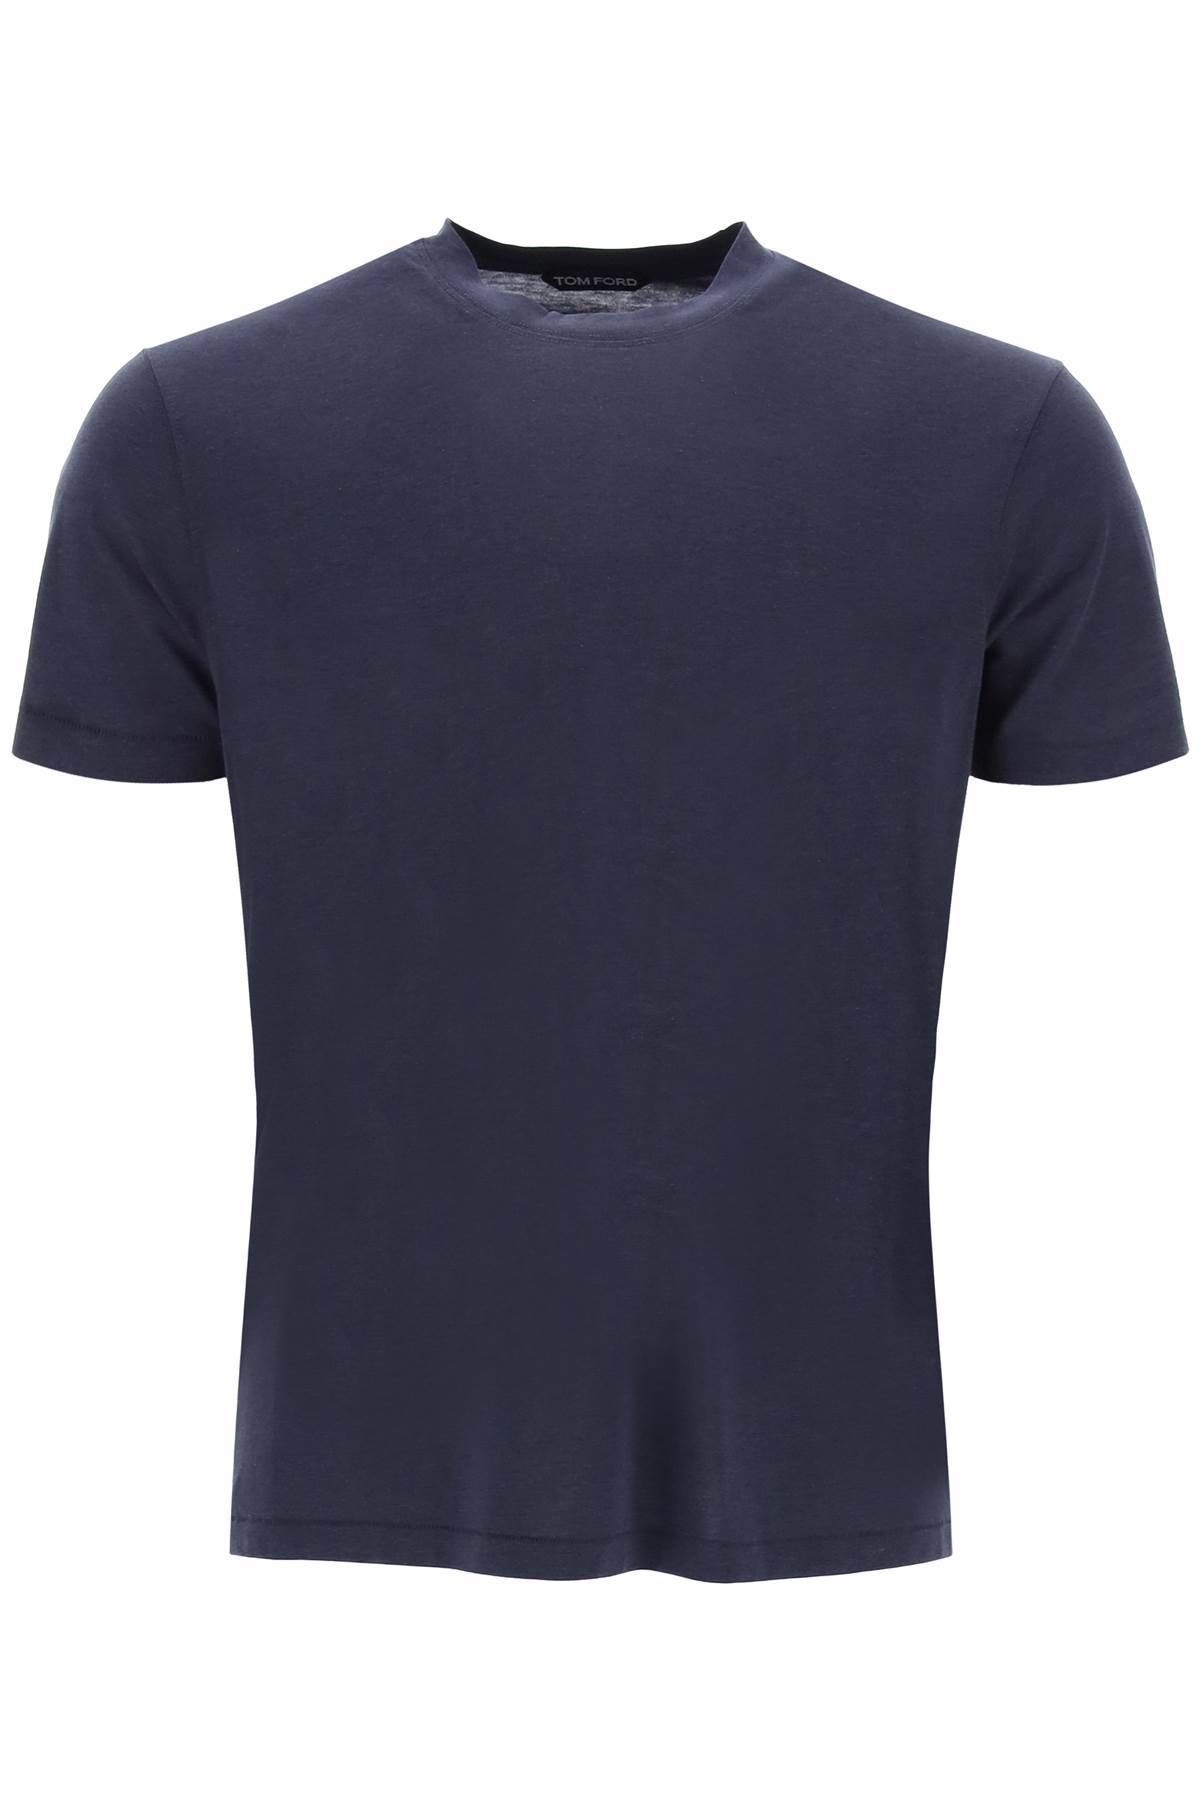 Tom Ford TOM FORD cottono and lyocell t-shirt